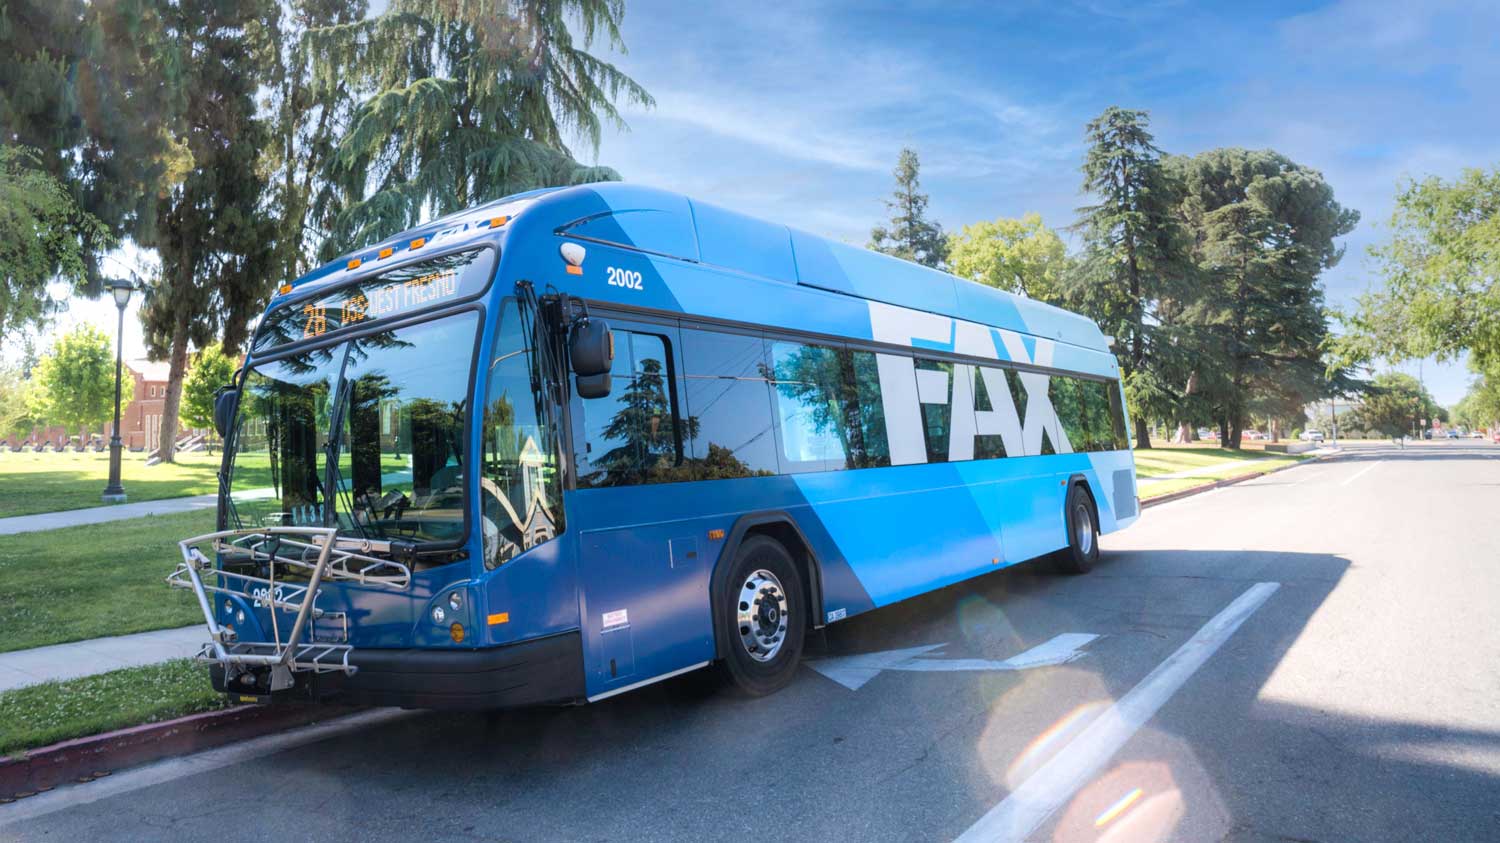 Fresno Area Express buses rely on Measure C funding